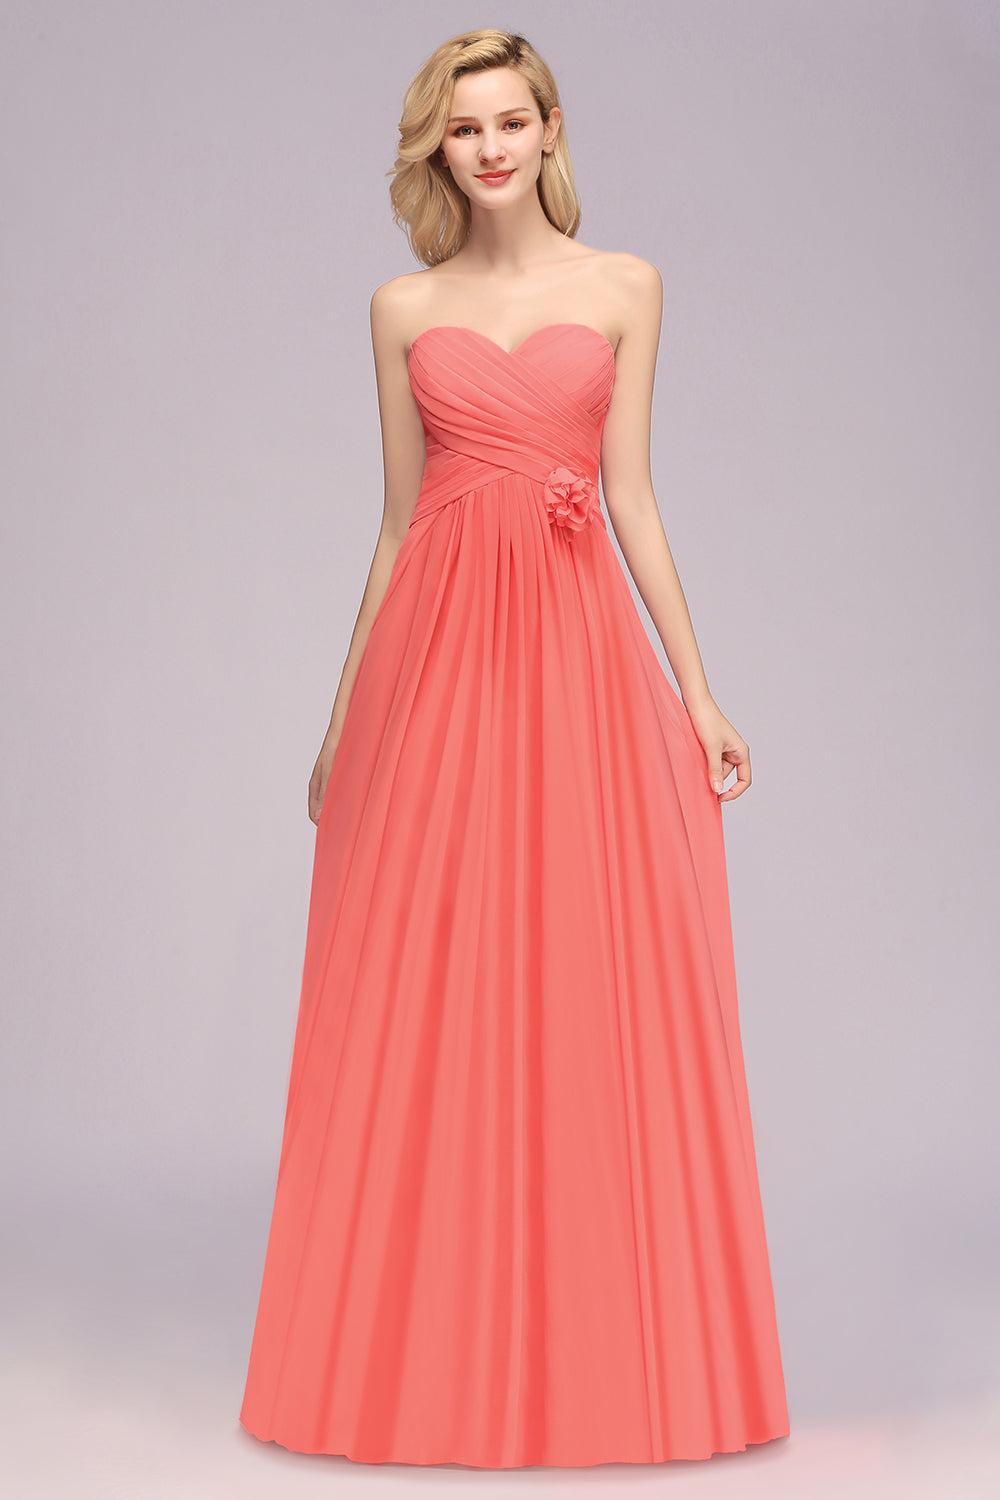 Affordable Sweetheart Strapless Chiffon Bridesmaid Dress with Flower